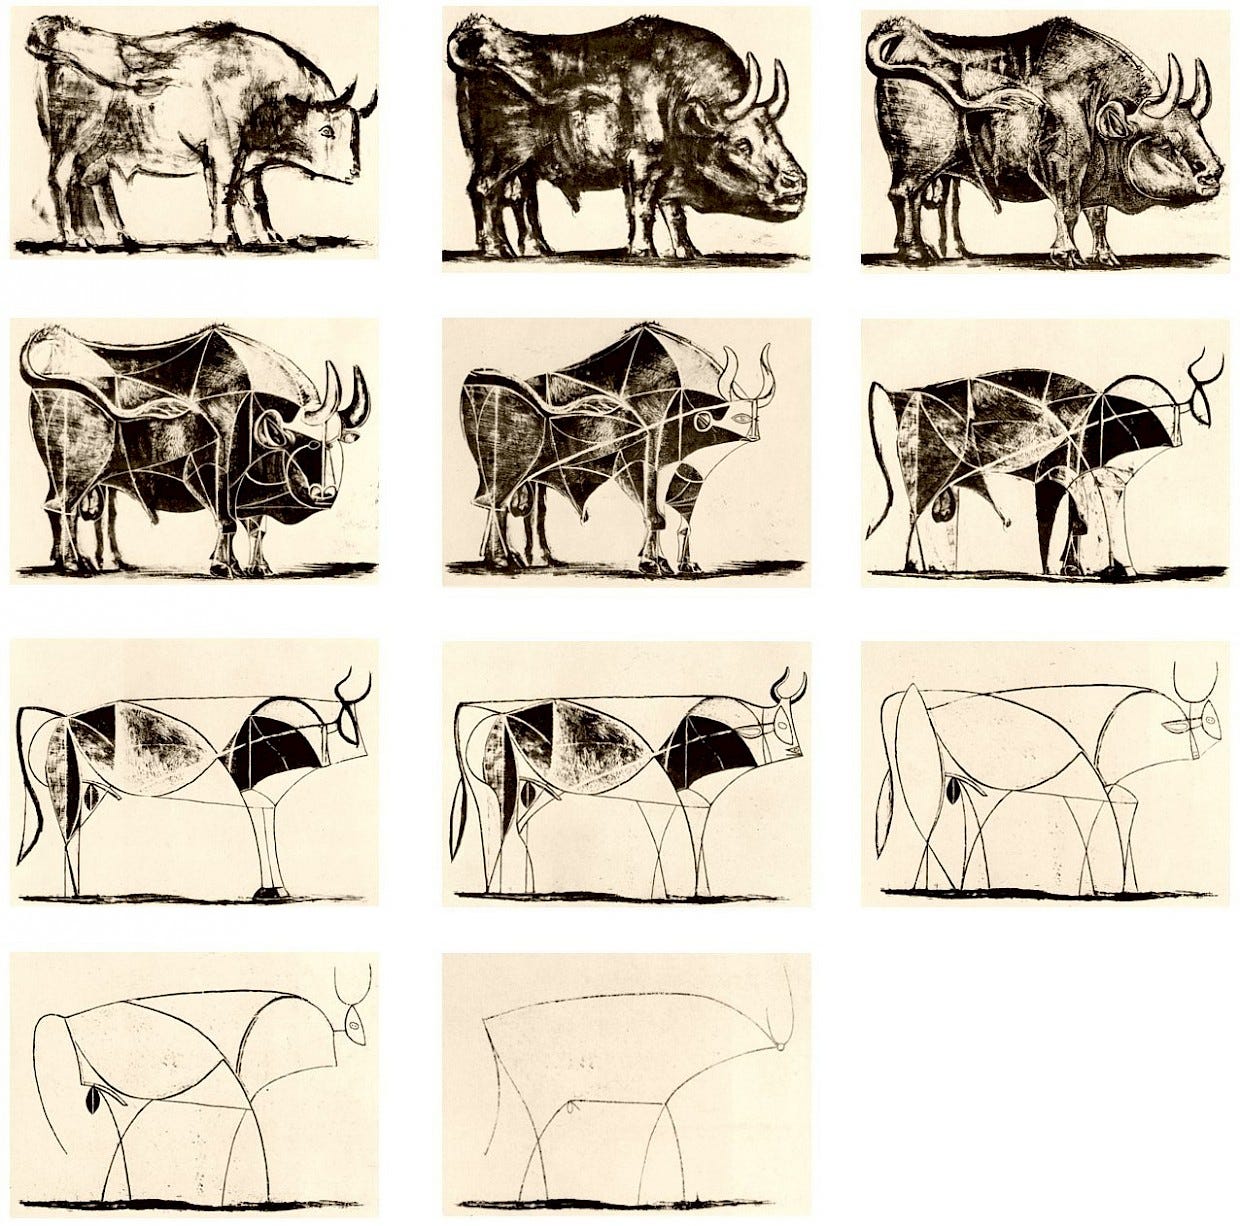 Pablo Picasso, Lithographs from The Bull, 1945-1946